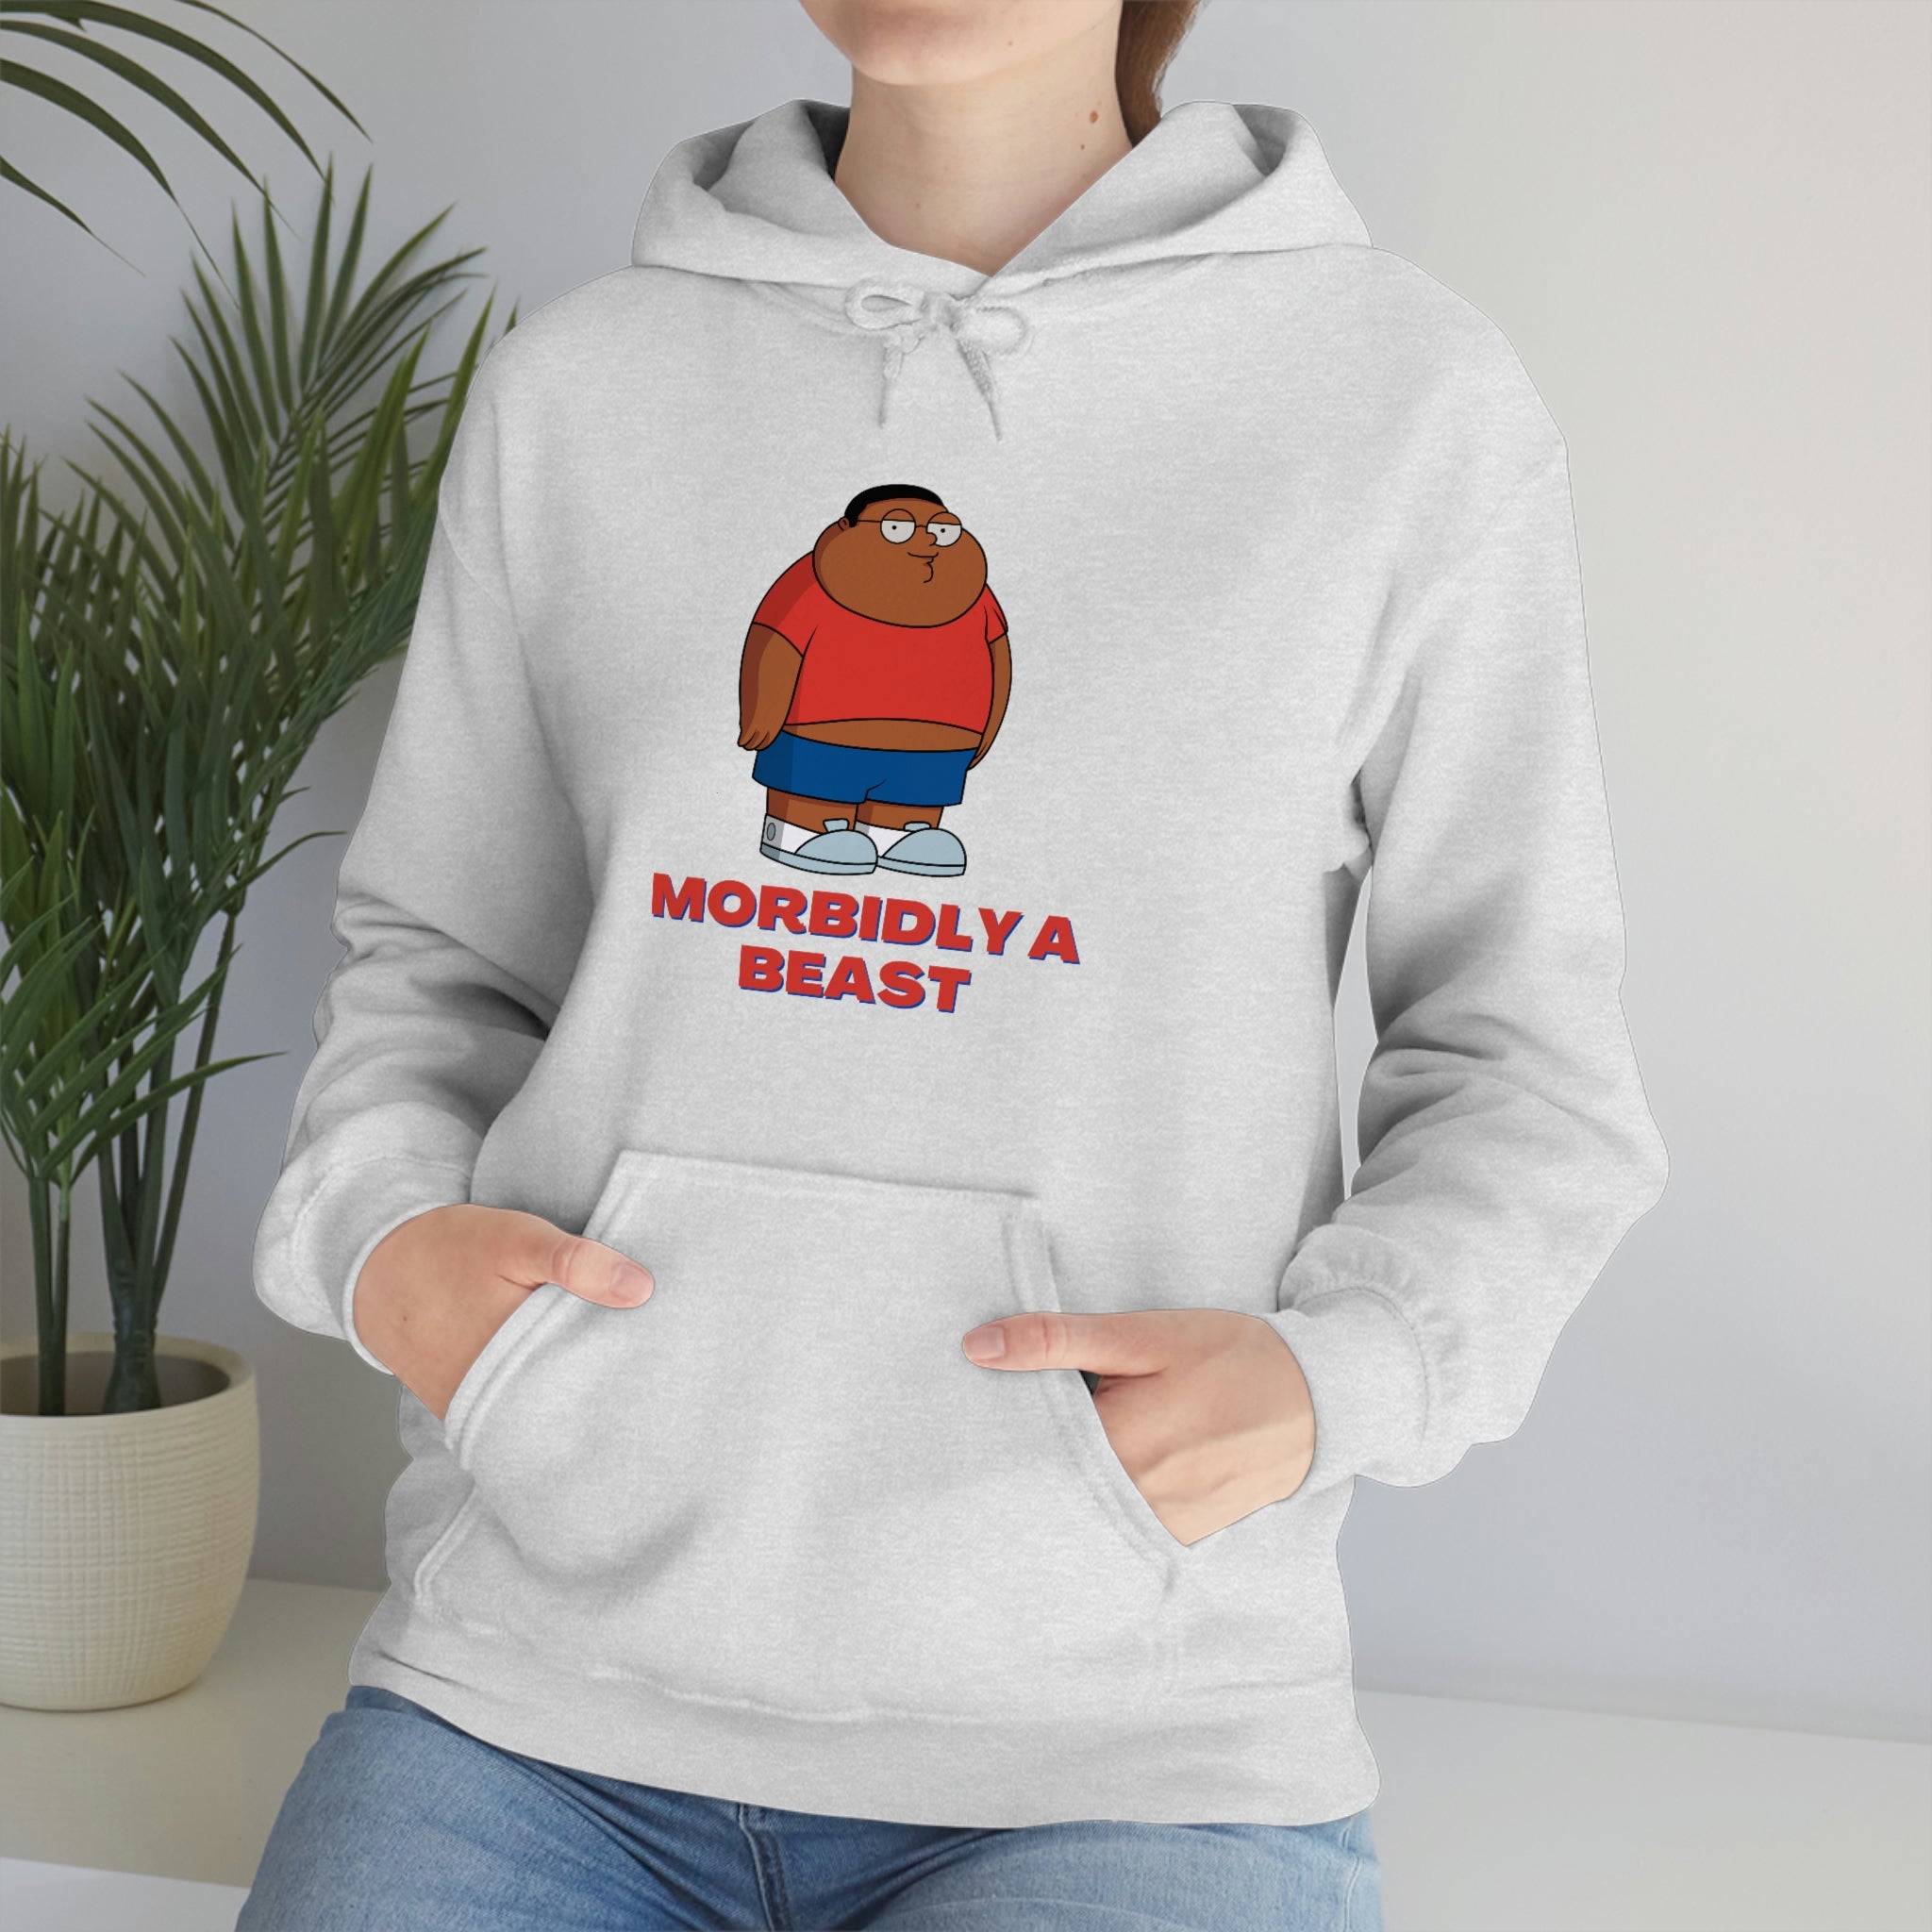 Morbidly a Beast - Unisex Heavy Blend™ Hooded Sweatshirt - ALL COLORS